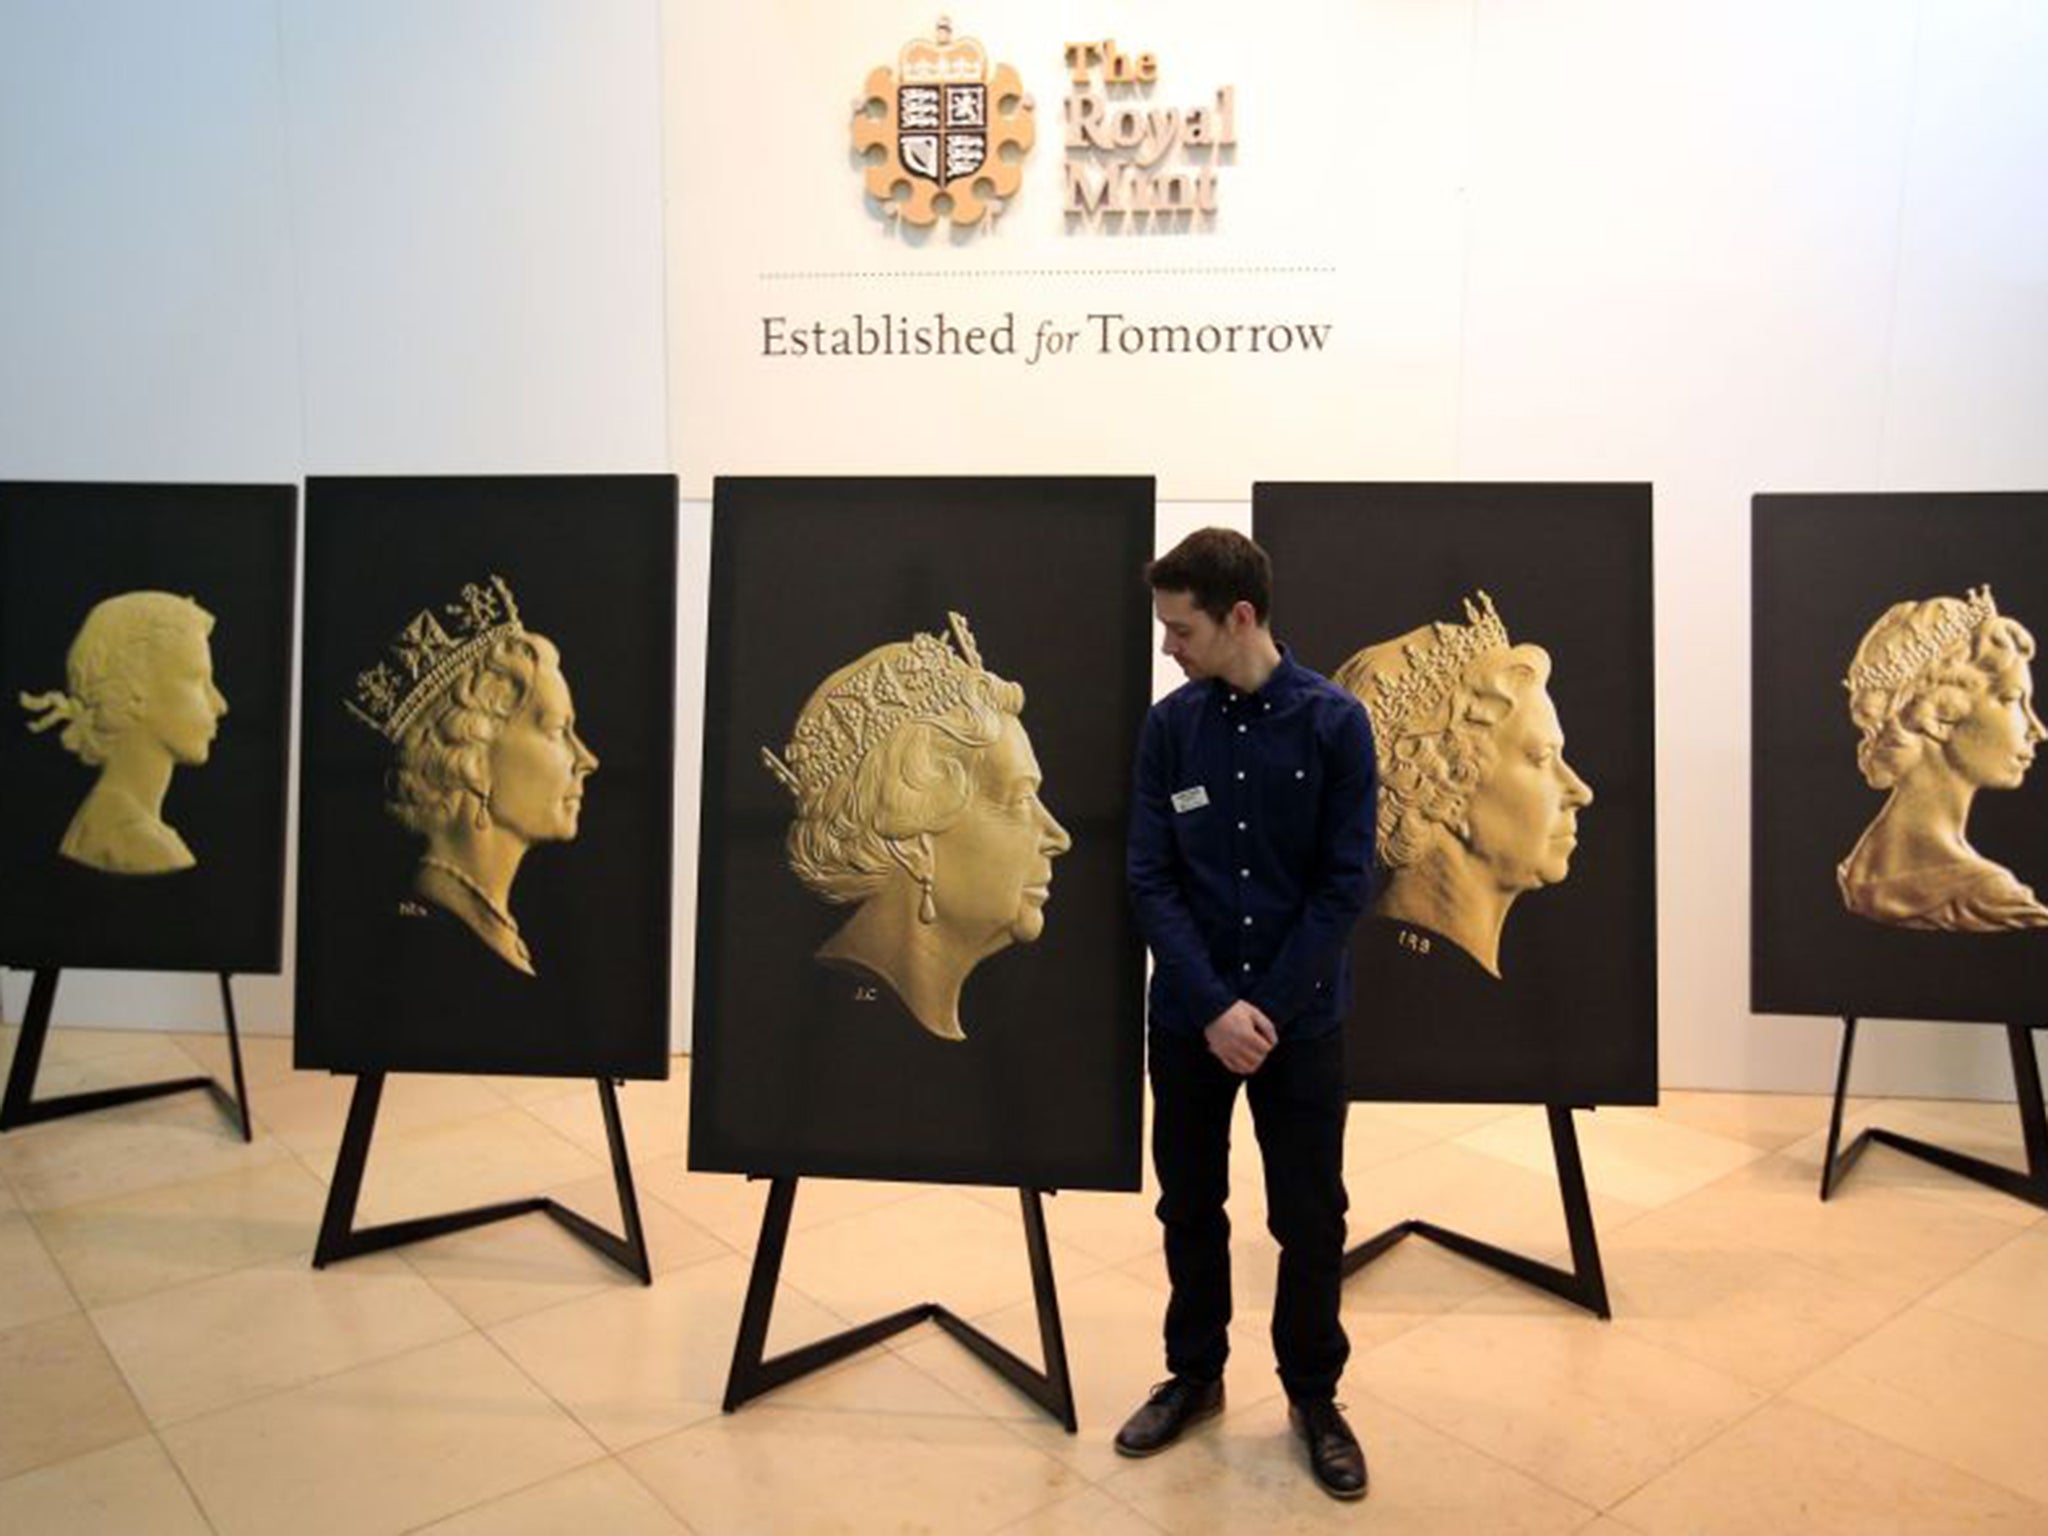 The Royal Mint Engraver Jody Clark with his new coinage portrait, alongside the four previous incarnations